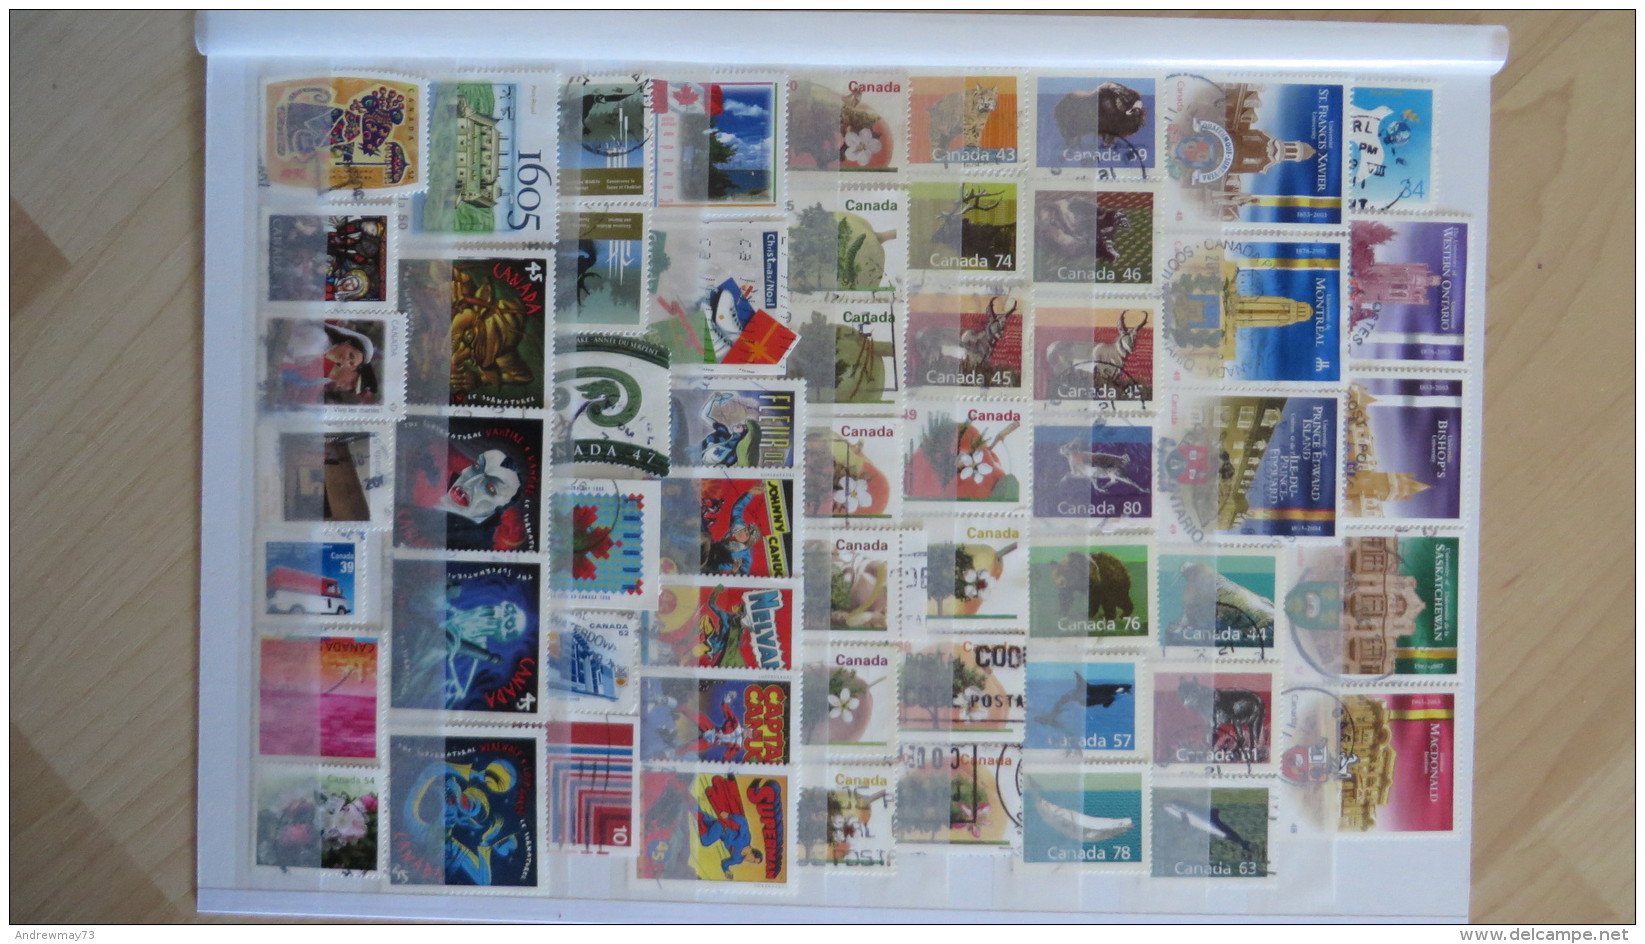 AMAZING CANADA COLLECTION: 0VER 2000 DIFFERENT